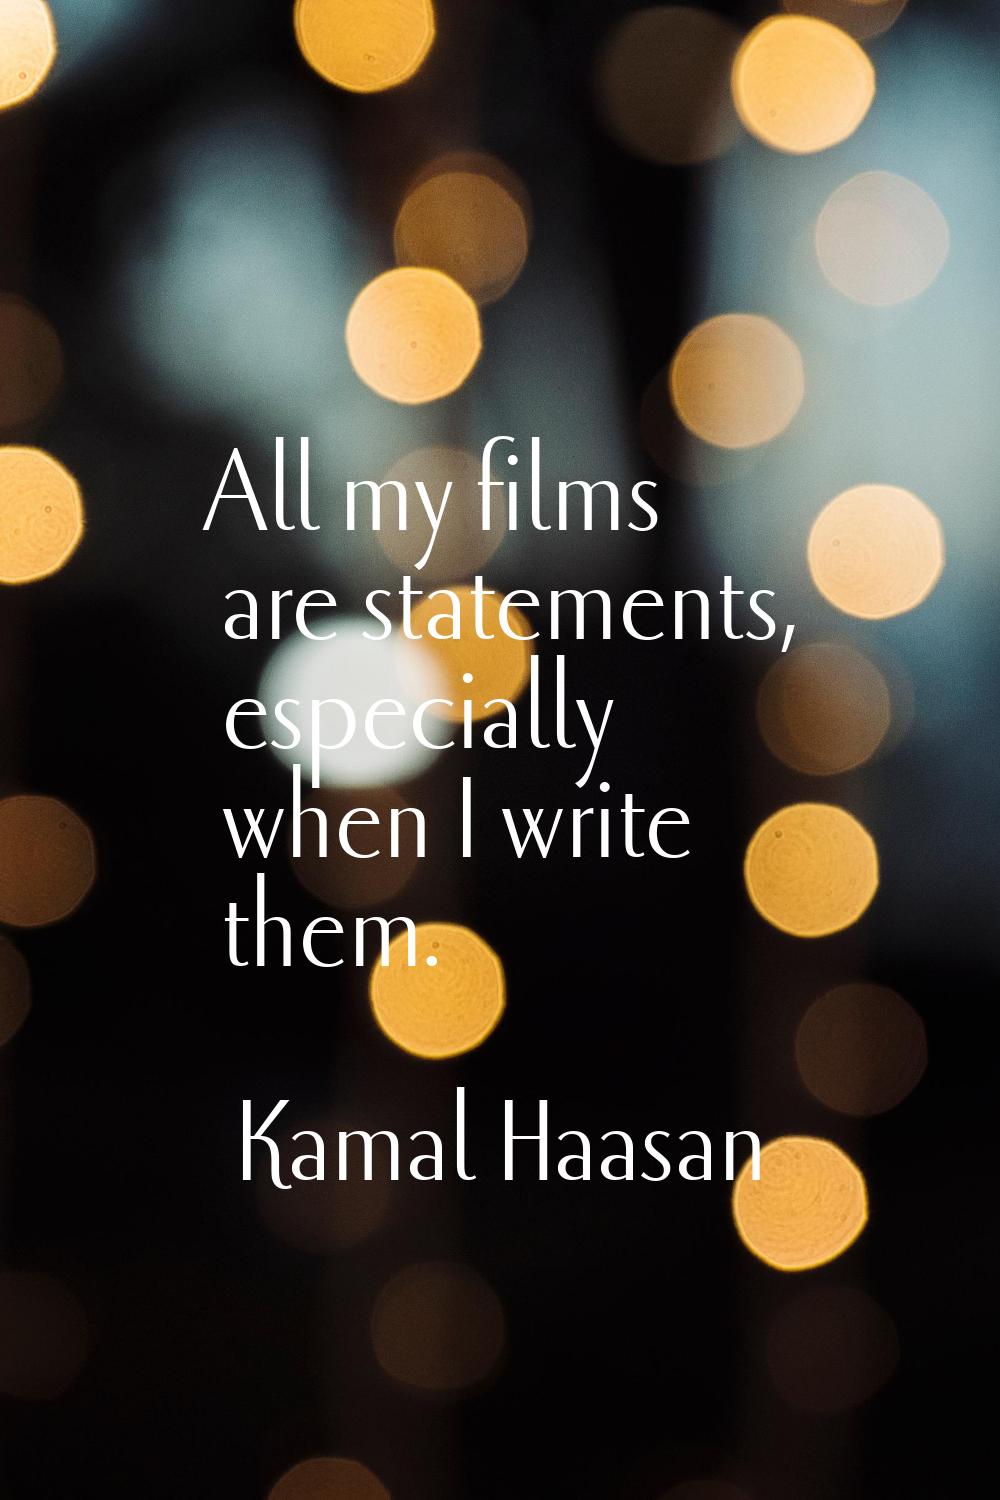 All my films are statements, especially when I write them.